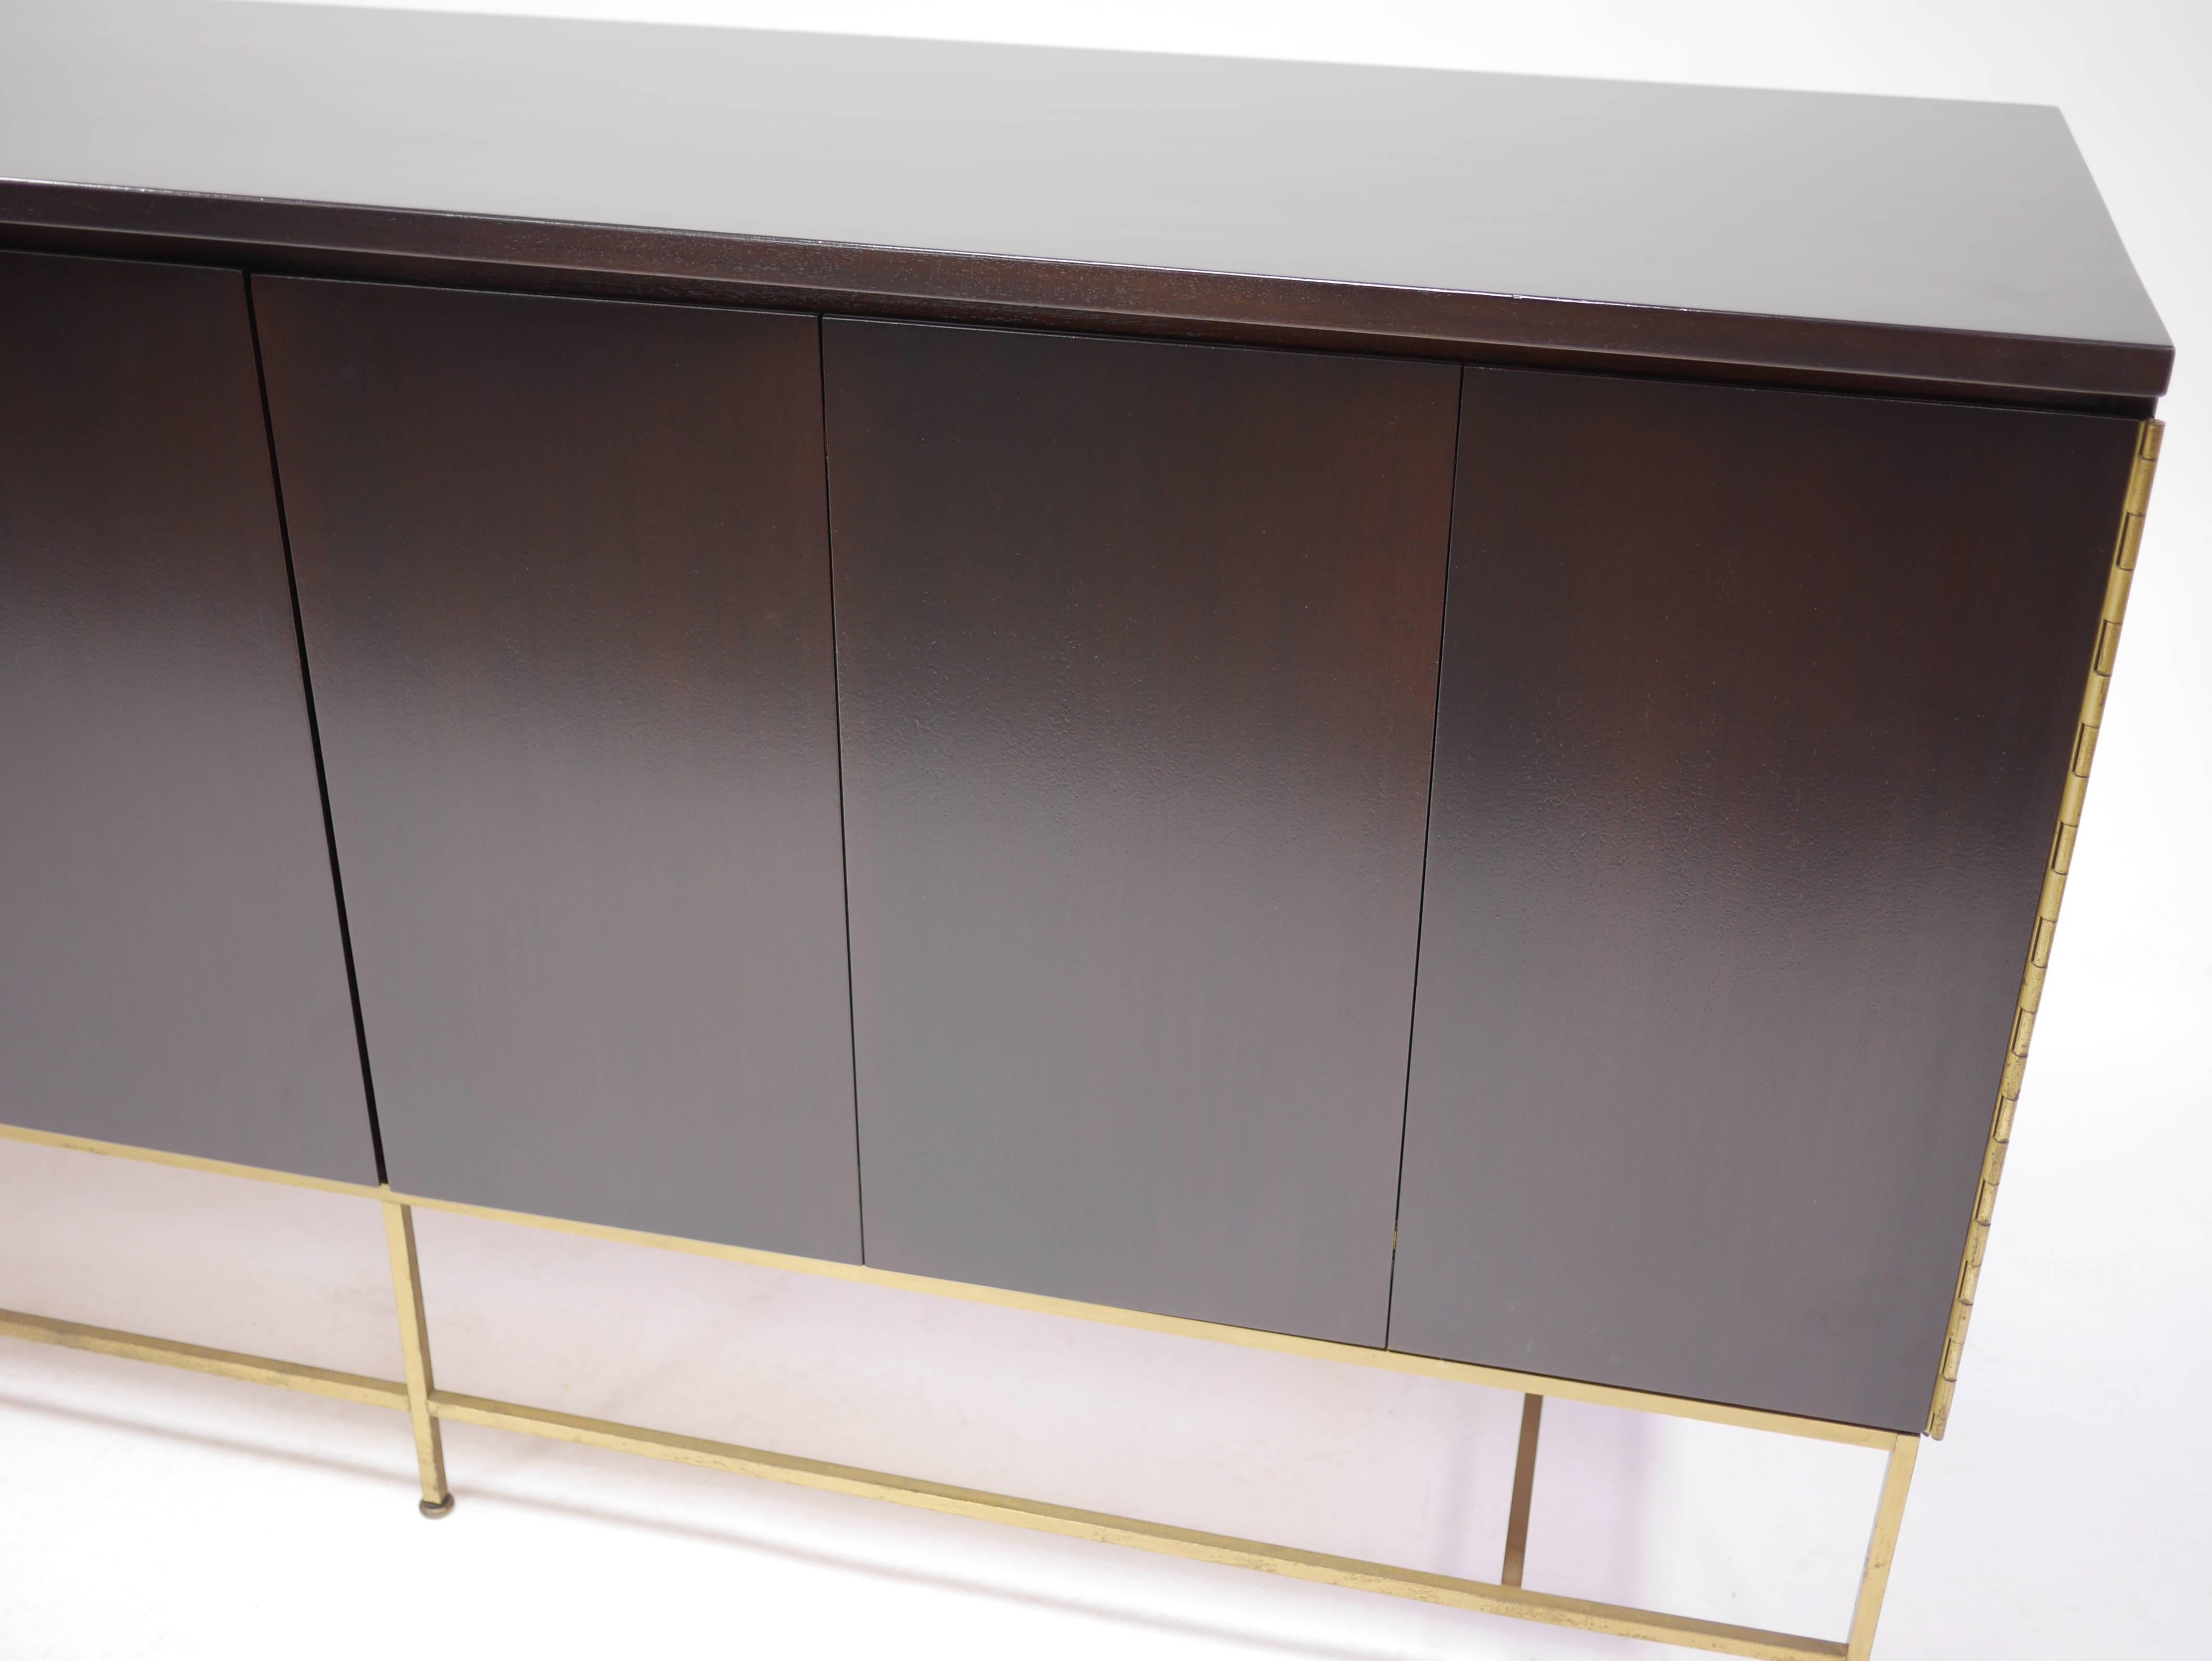 Mahogany and Brass Credenza by Paul McCobb for the Calvin Group 1